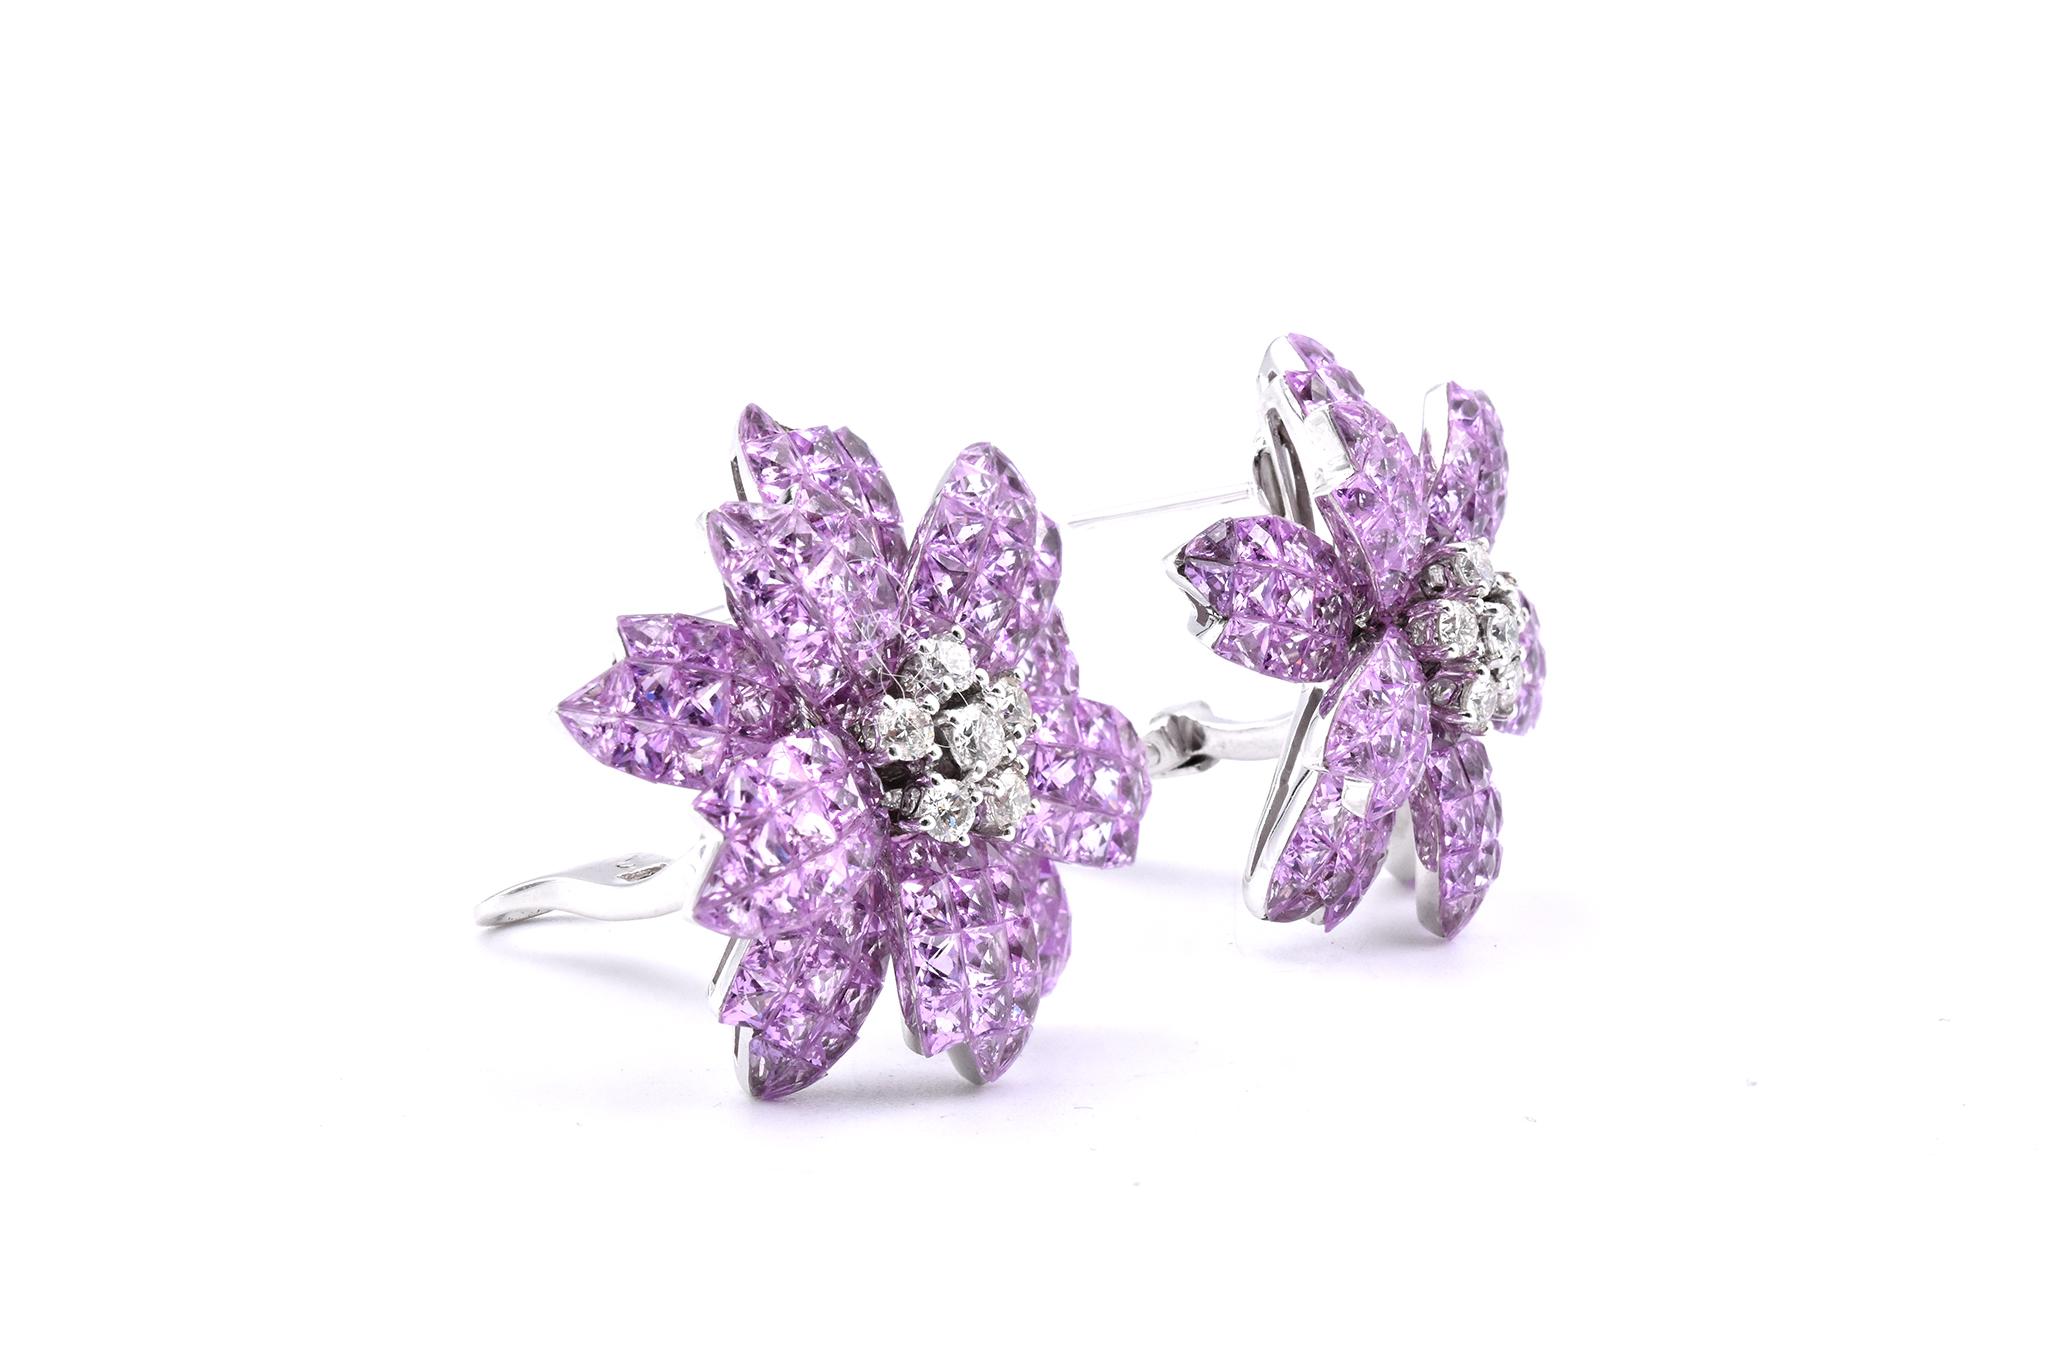 Material: 18k white gold
Sapphire: 26.00cttw
Color: Natural Pink
Diamonds: 12 round cut = .44cttw 
Color: G
Clarity: VS
Dimensions: earrings measure 27mm in diameter
Fastenings: post with omega backs
Weight: 23.68 grams